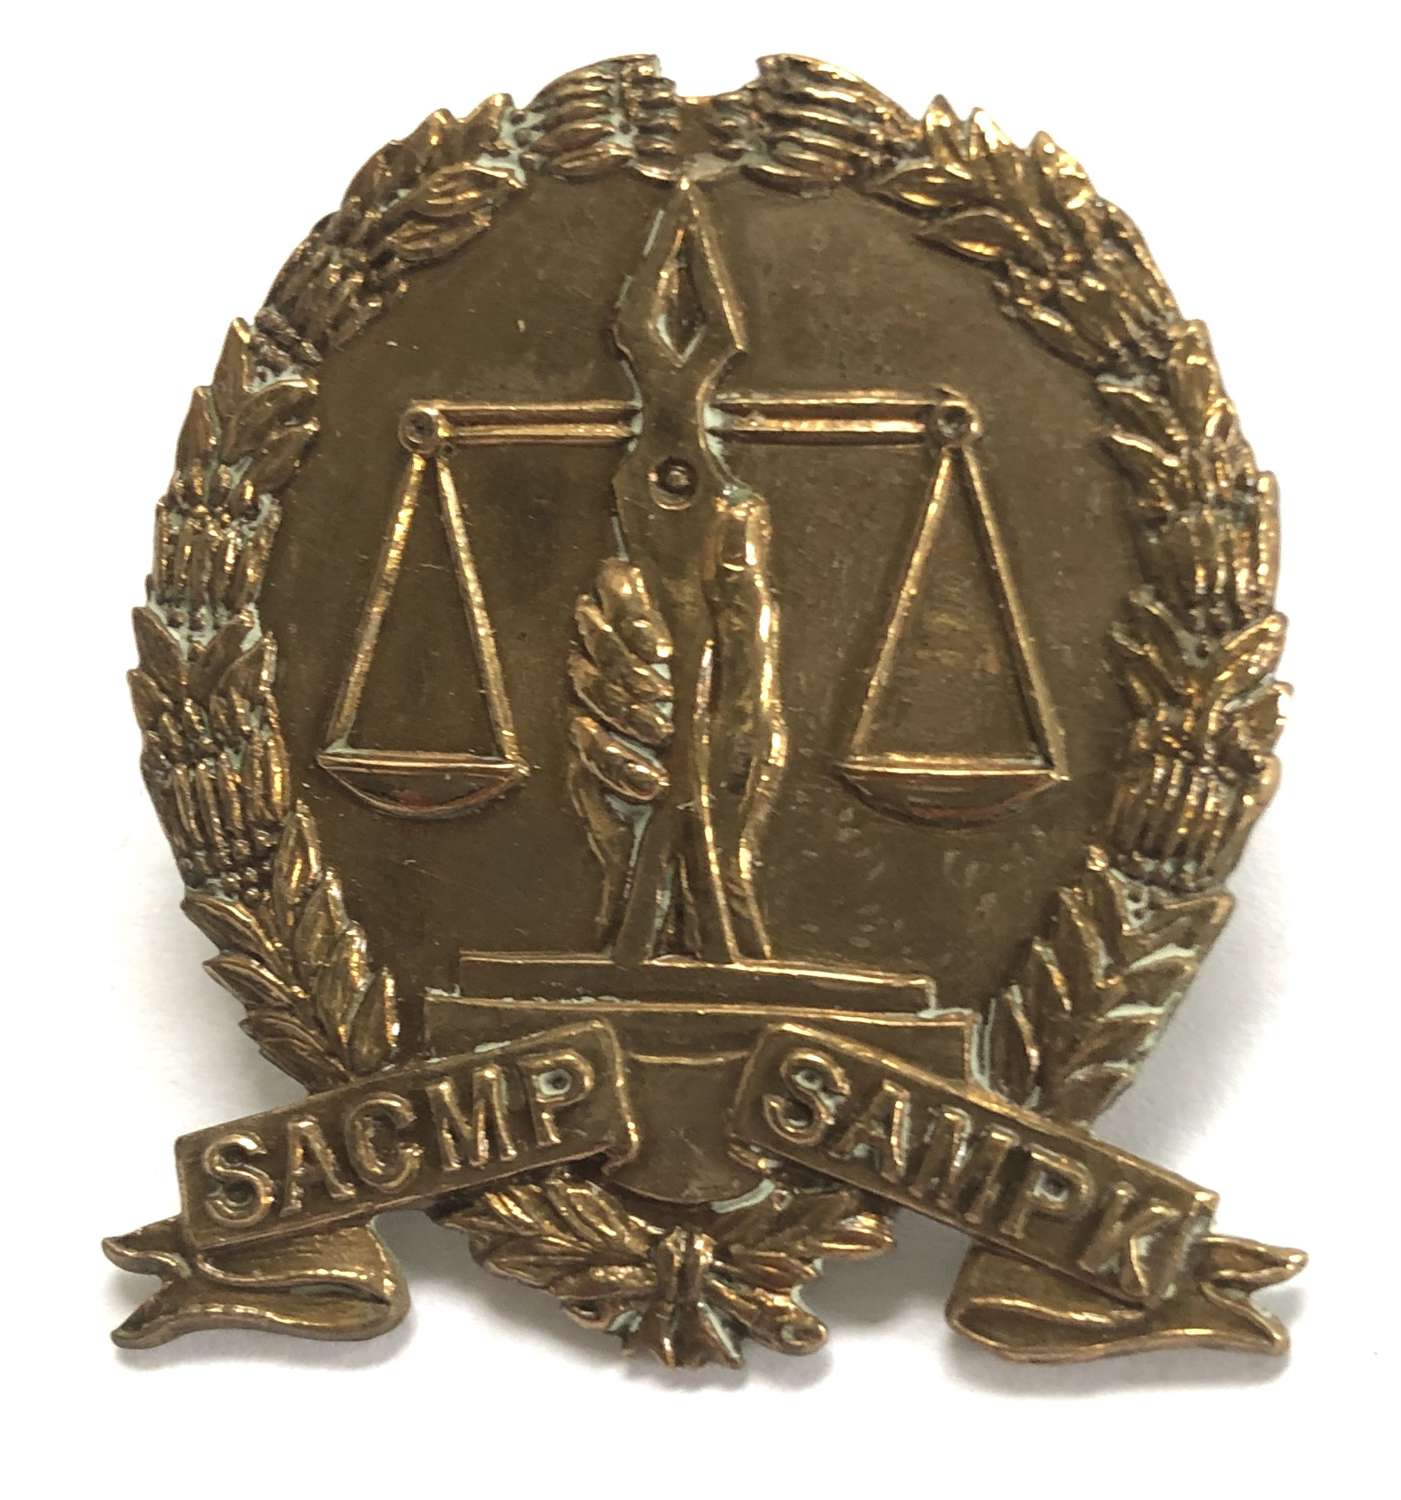 South African Corps of Military Police WW2 cap badge